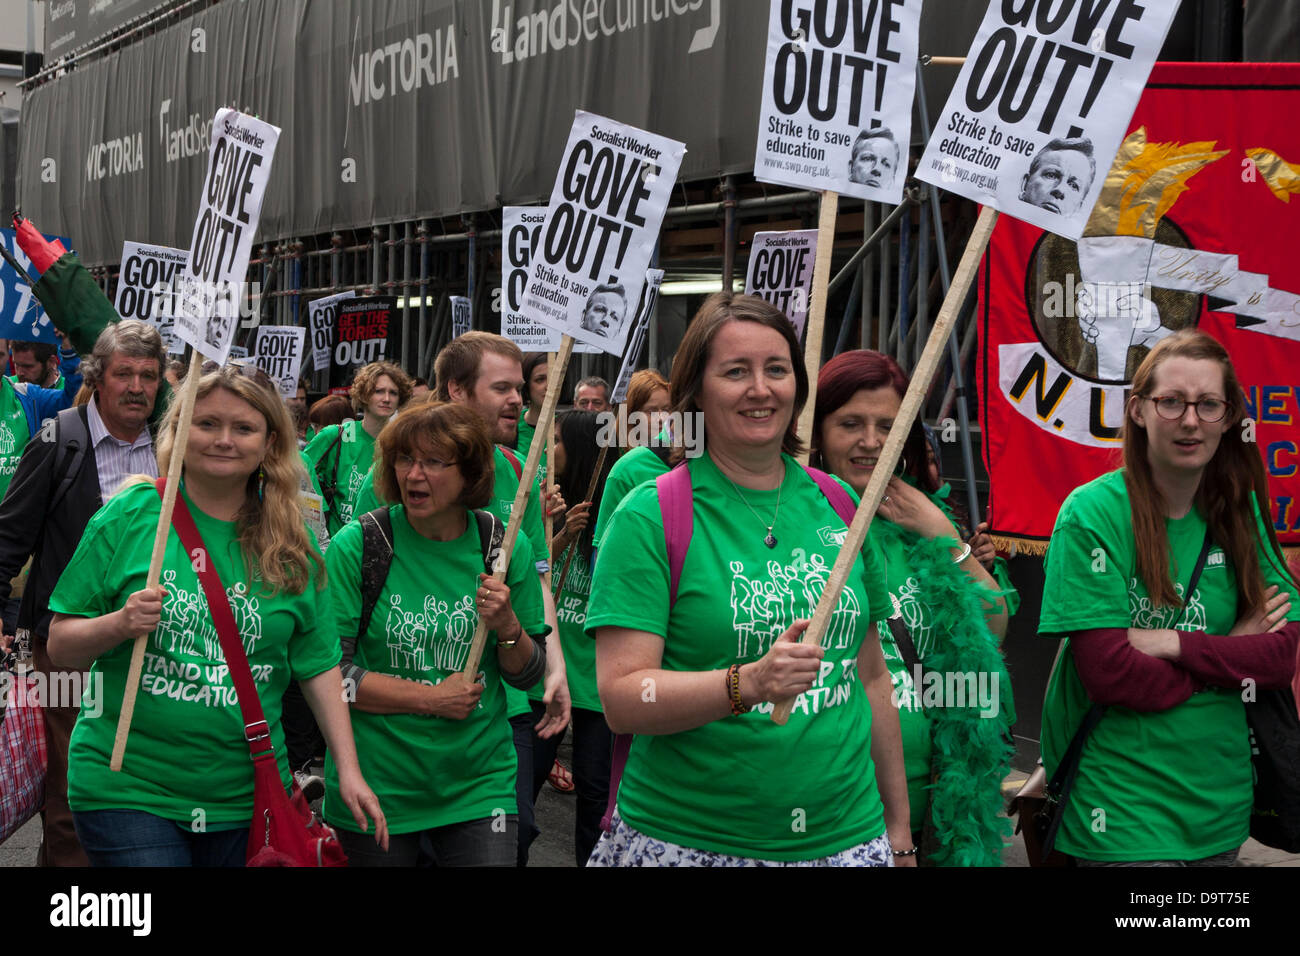 25 June 2013, London.  Protester demand Gove's exit as teachers march in London against the Education Secretary's proposed reforms. Stock Photo